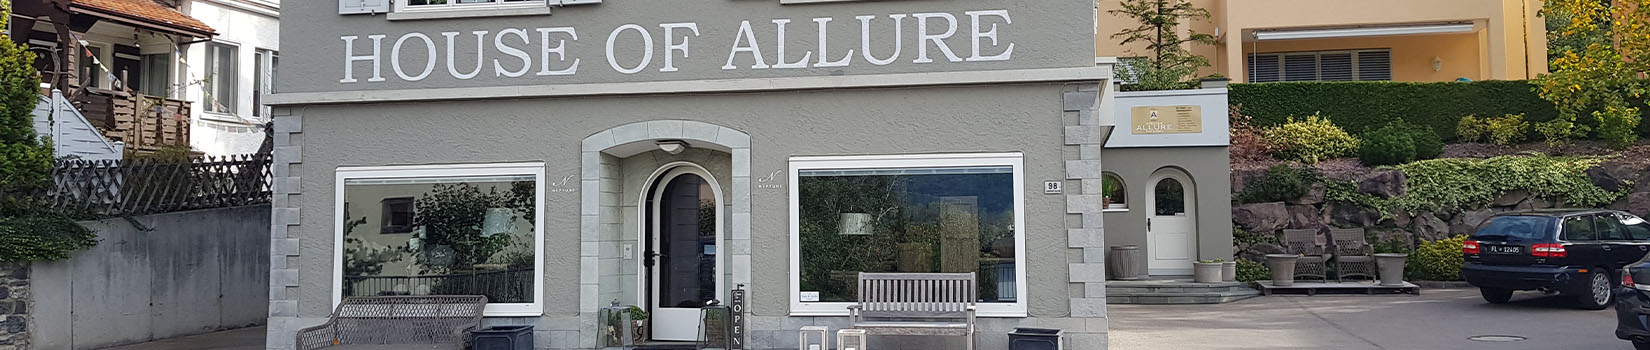 House of ALLURE